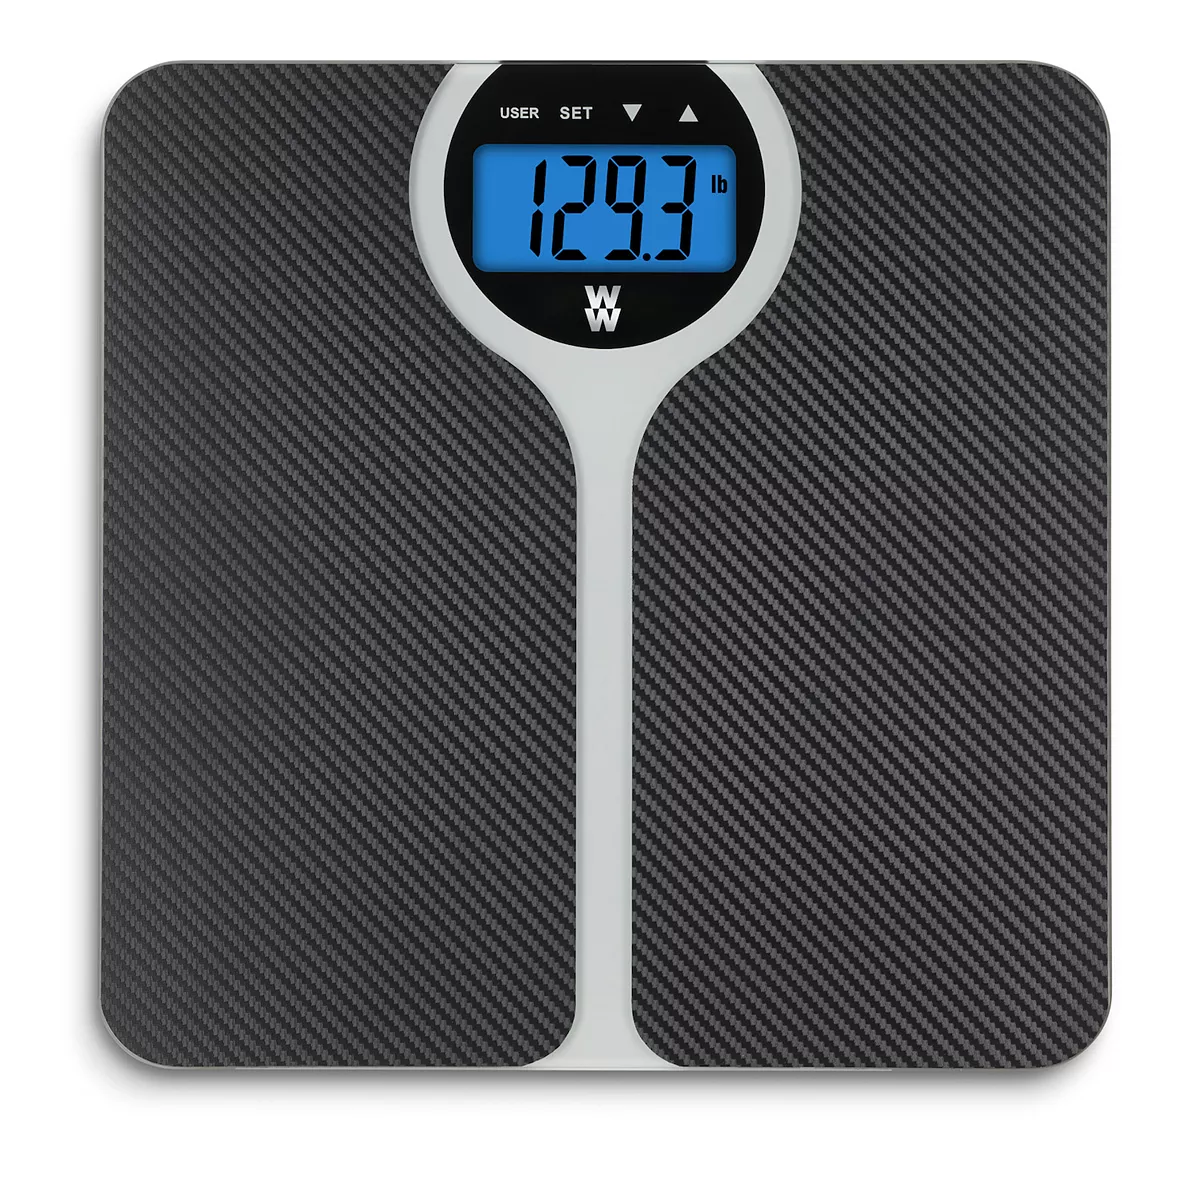 Weight Watchers Scales by Conair Digital Precision BMI Scale WW346